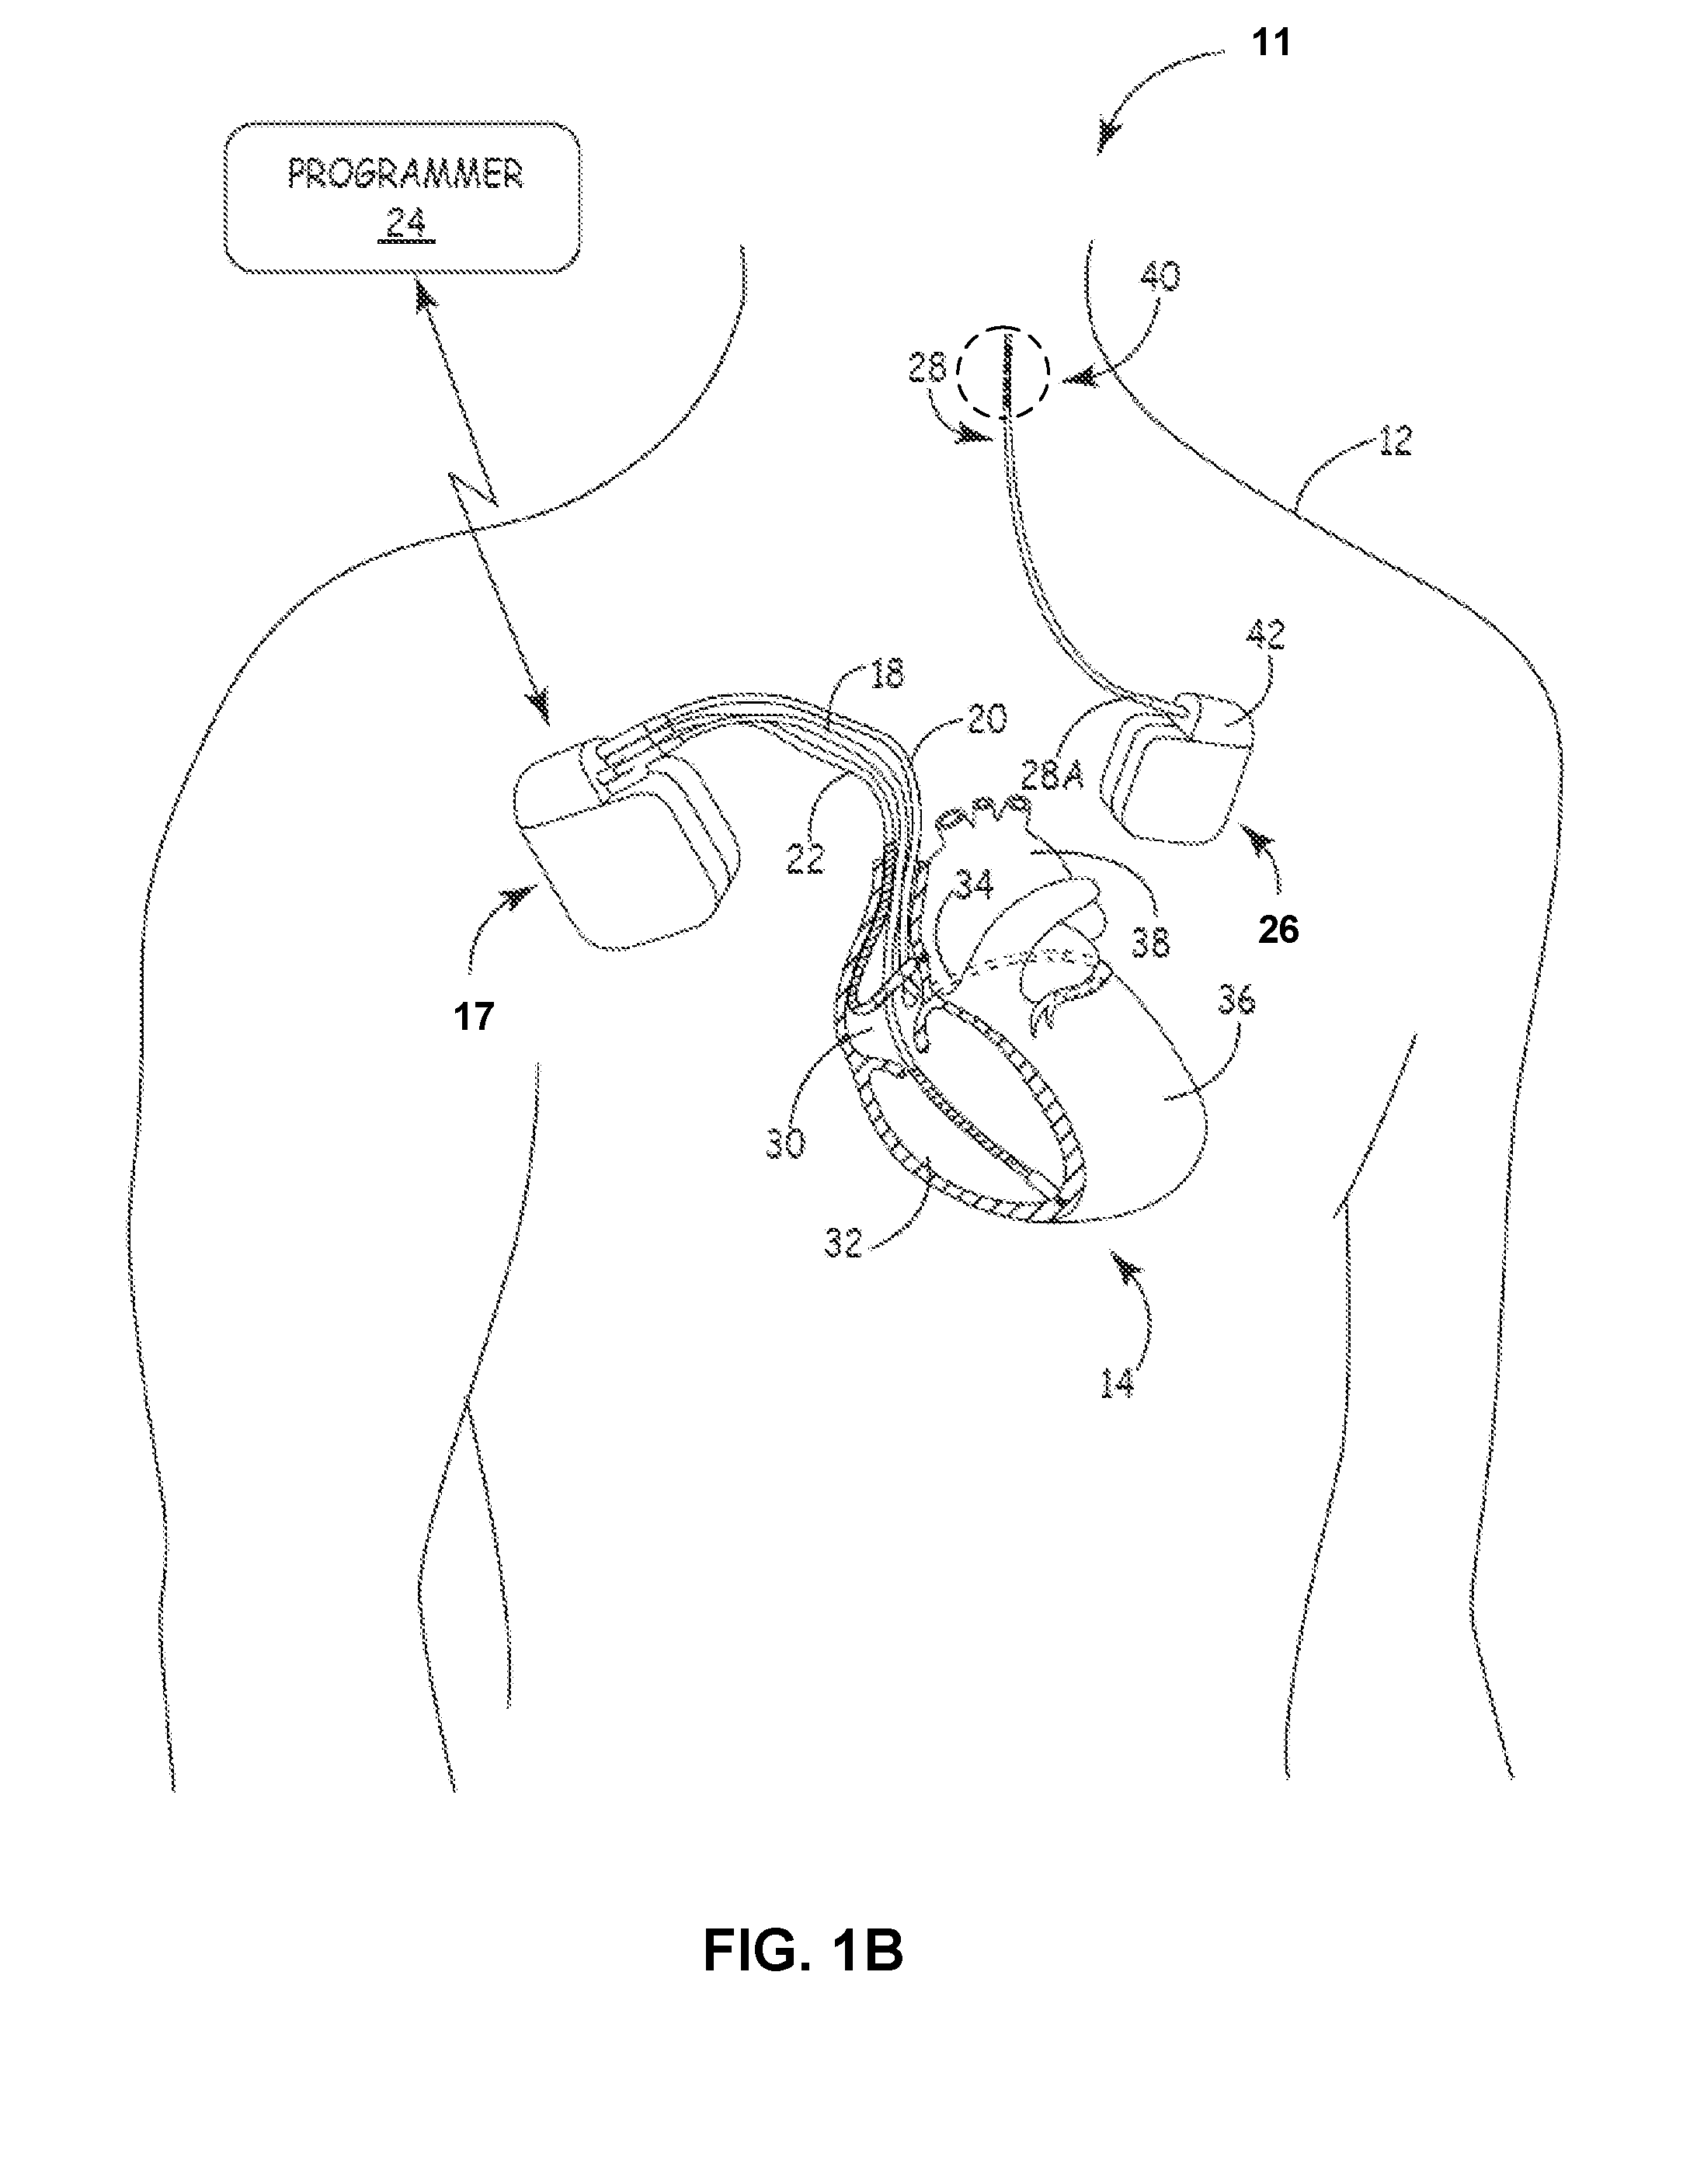 Techniques for placing medical leads for electrical stimulation of nerve tissue